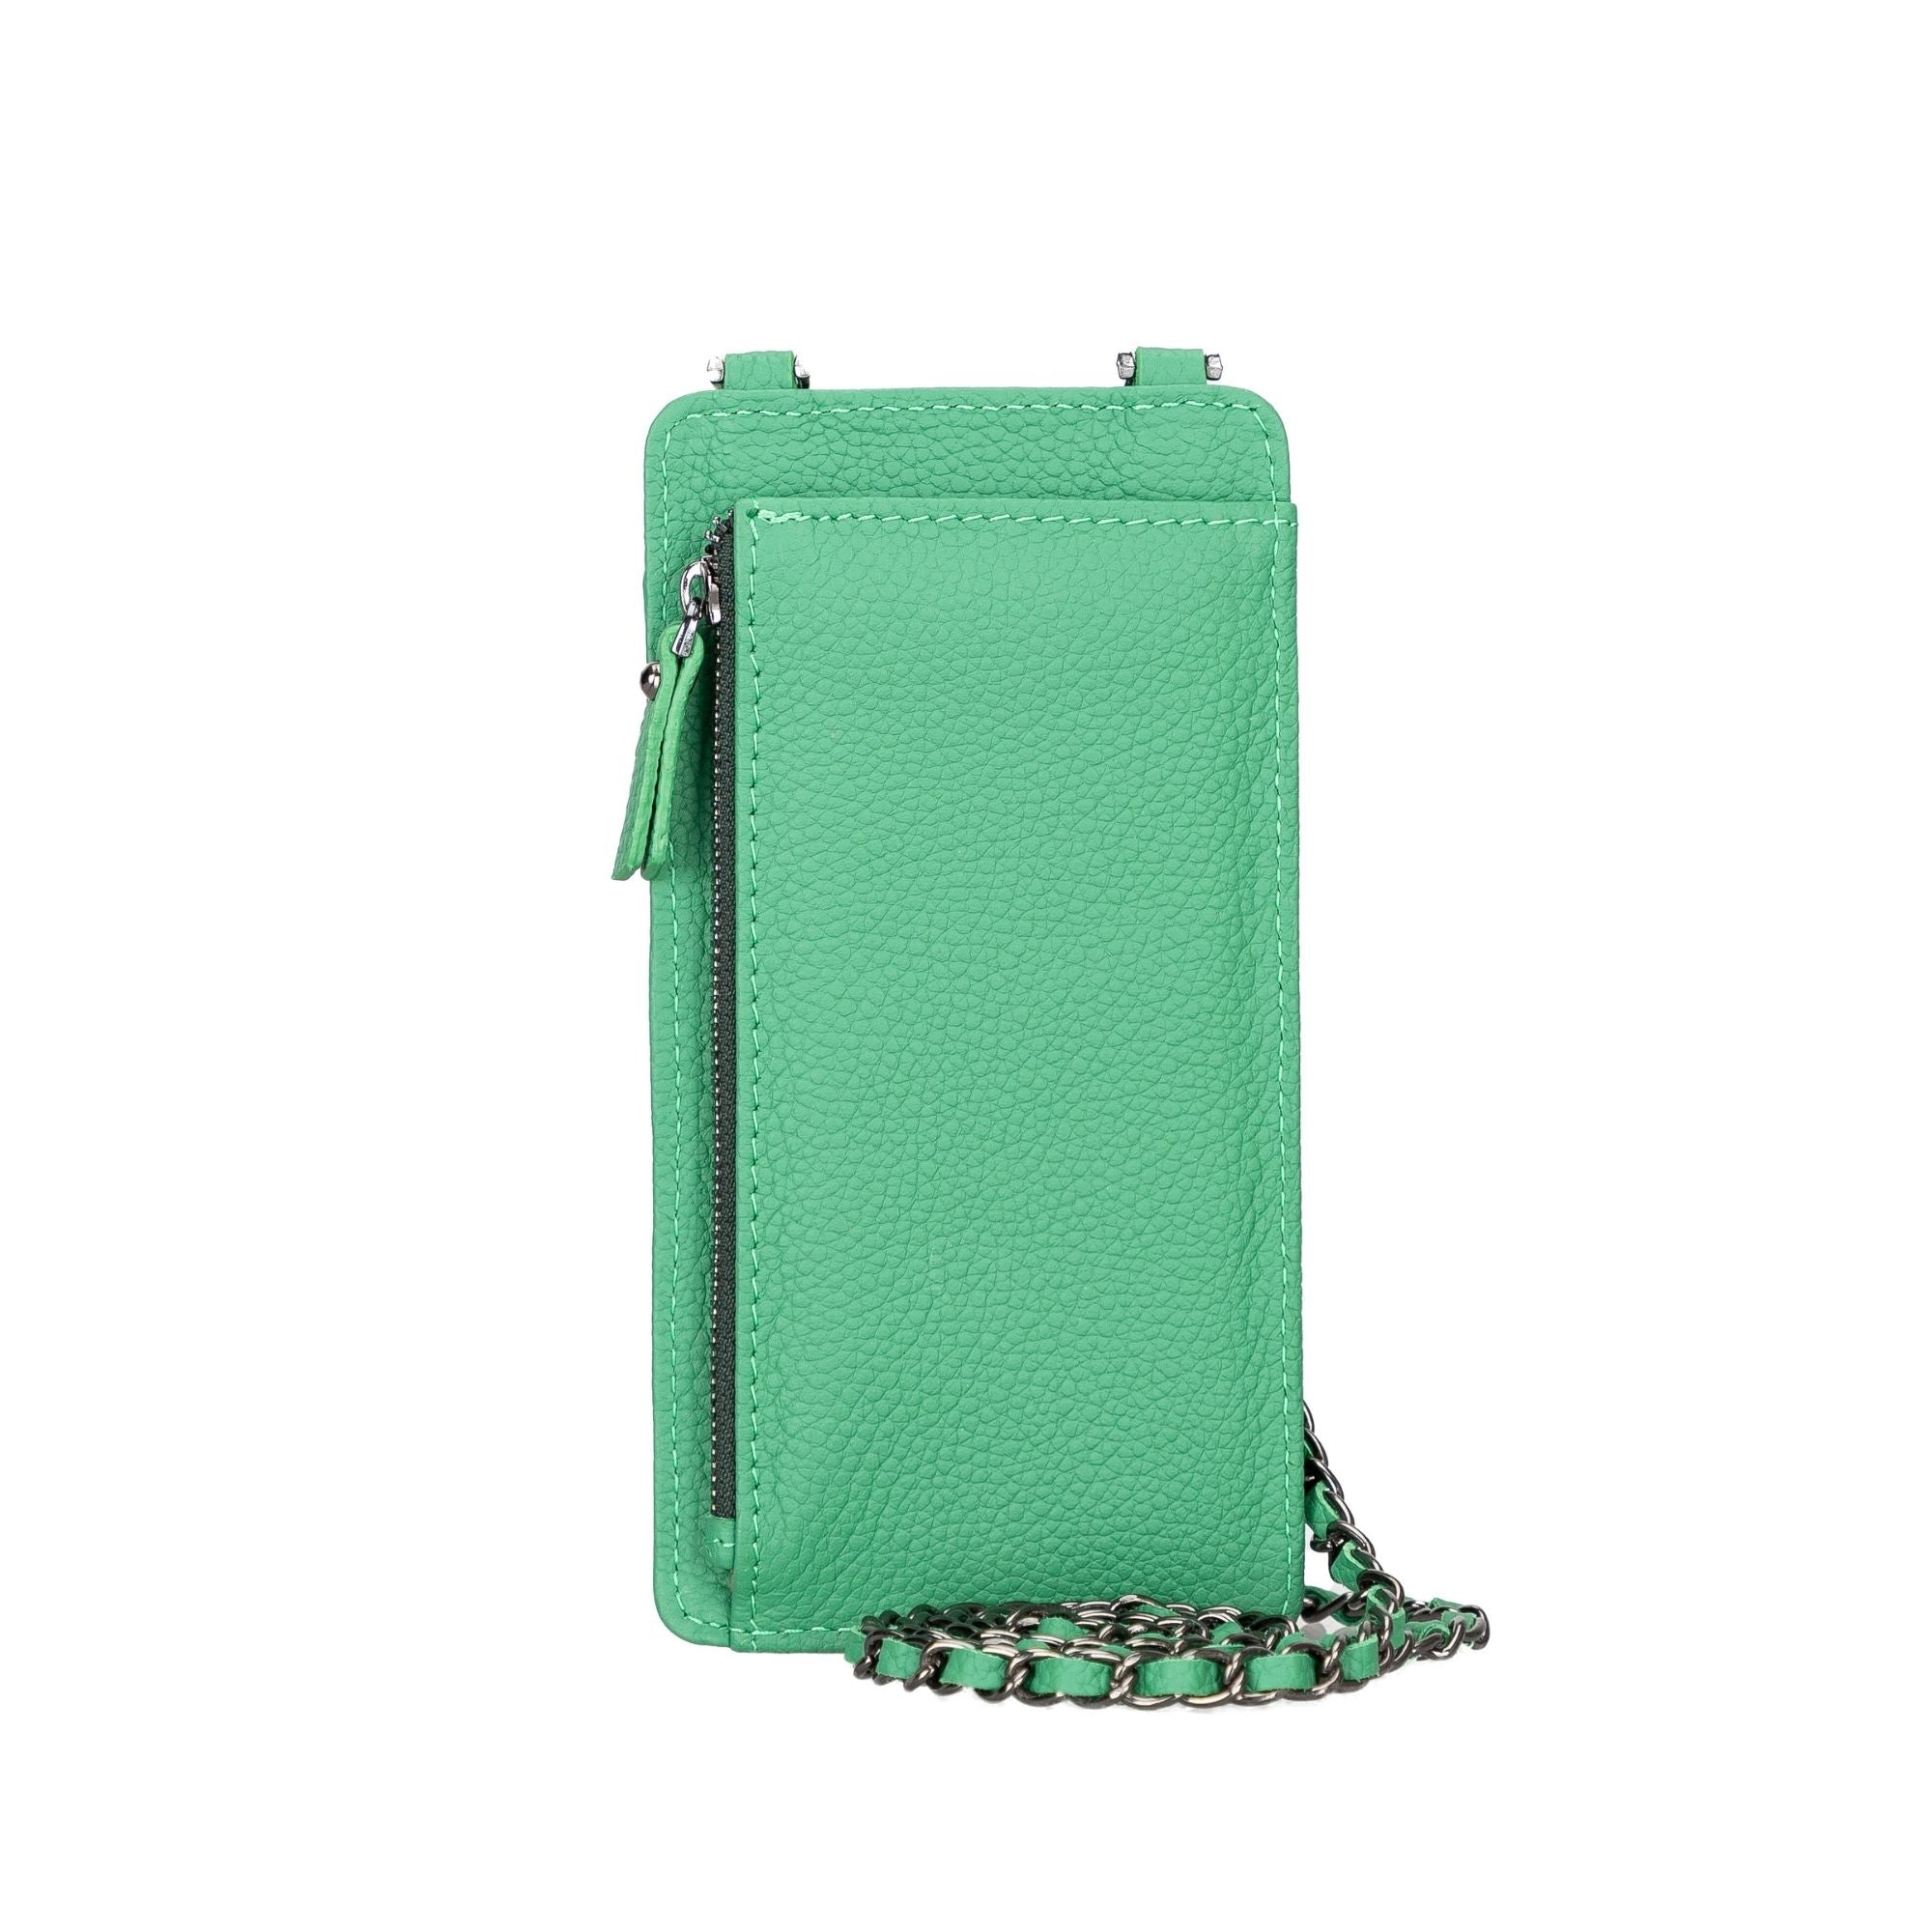 Lovell Leather Handbag with Phone Compartment and Shoulder Strap - Green - TORONATA